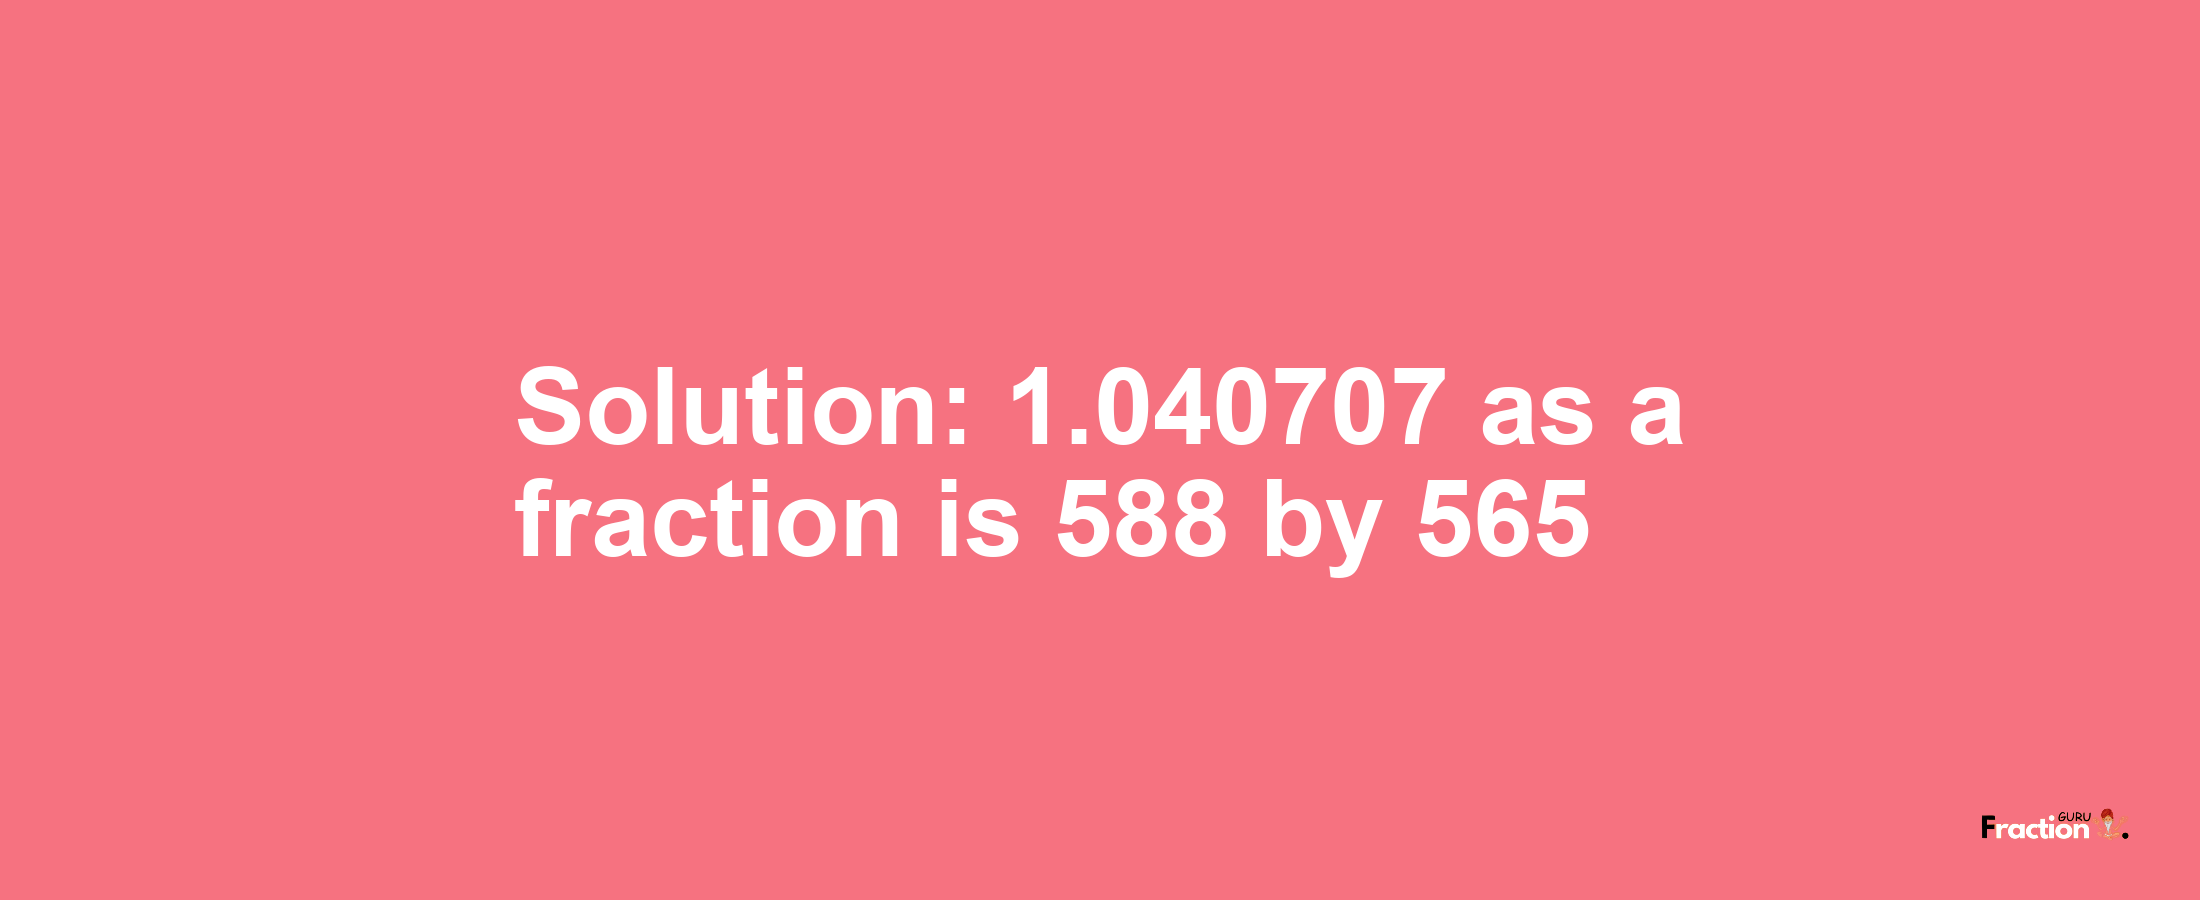 Solution:1.040707 as a fraction is 588/565